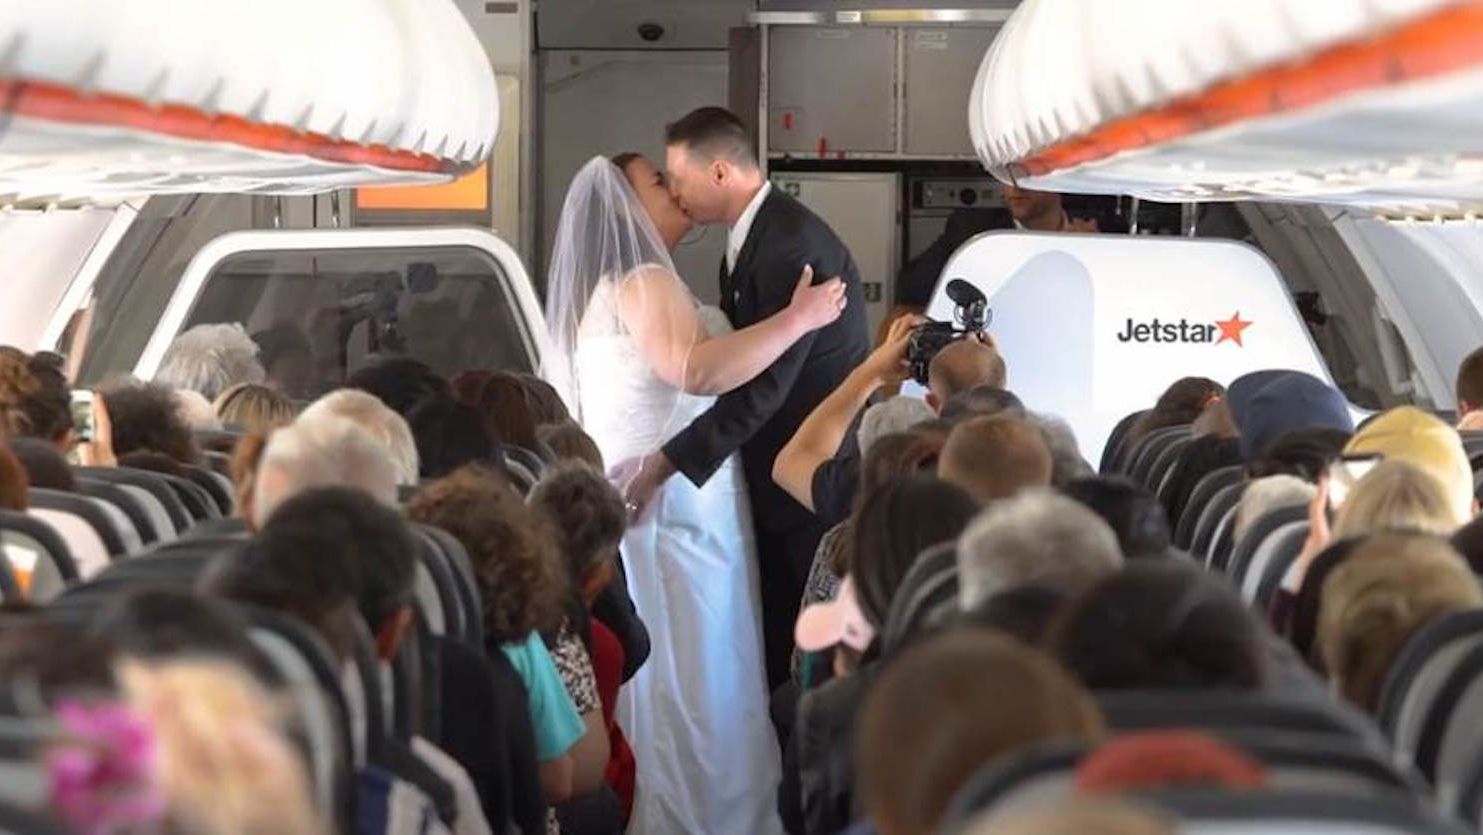 Cathy and David Valliant tied the knot on a Jetstar flight mid-way between Sydney and Auckland.